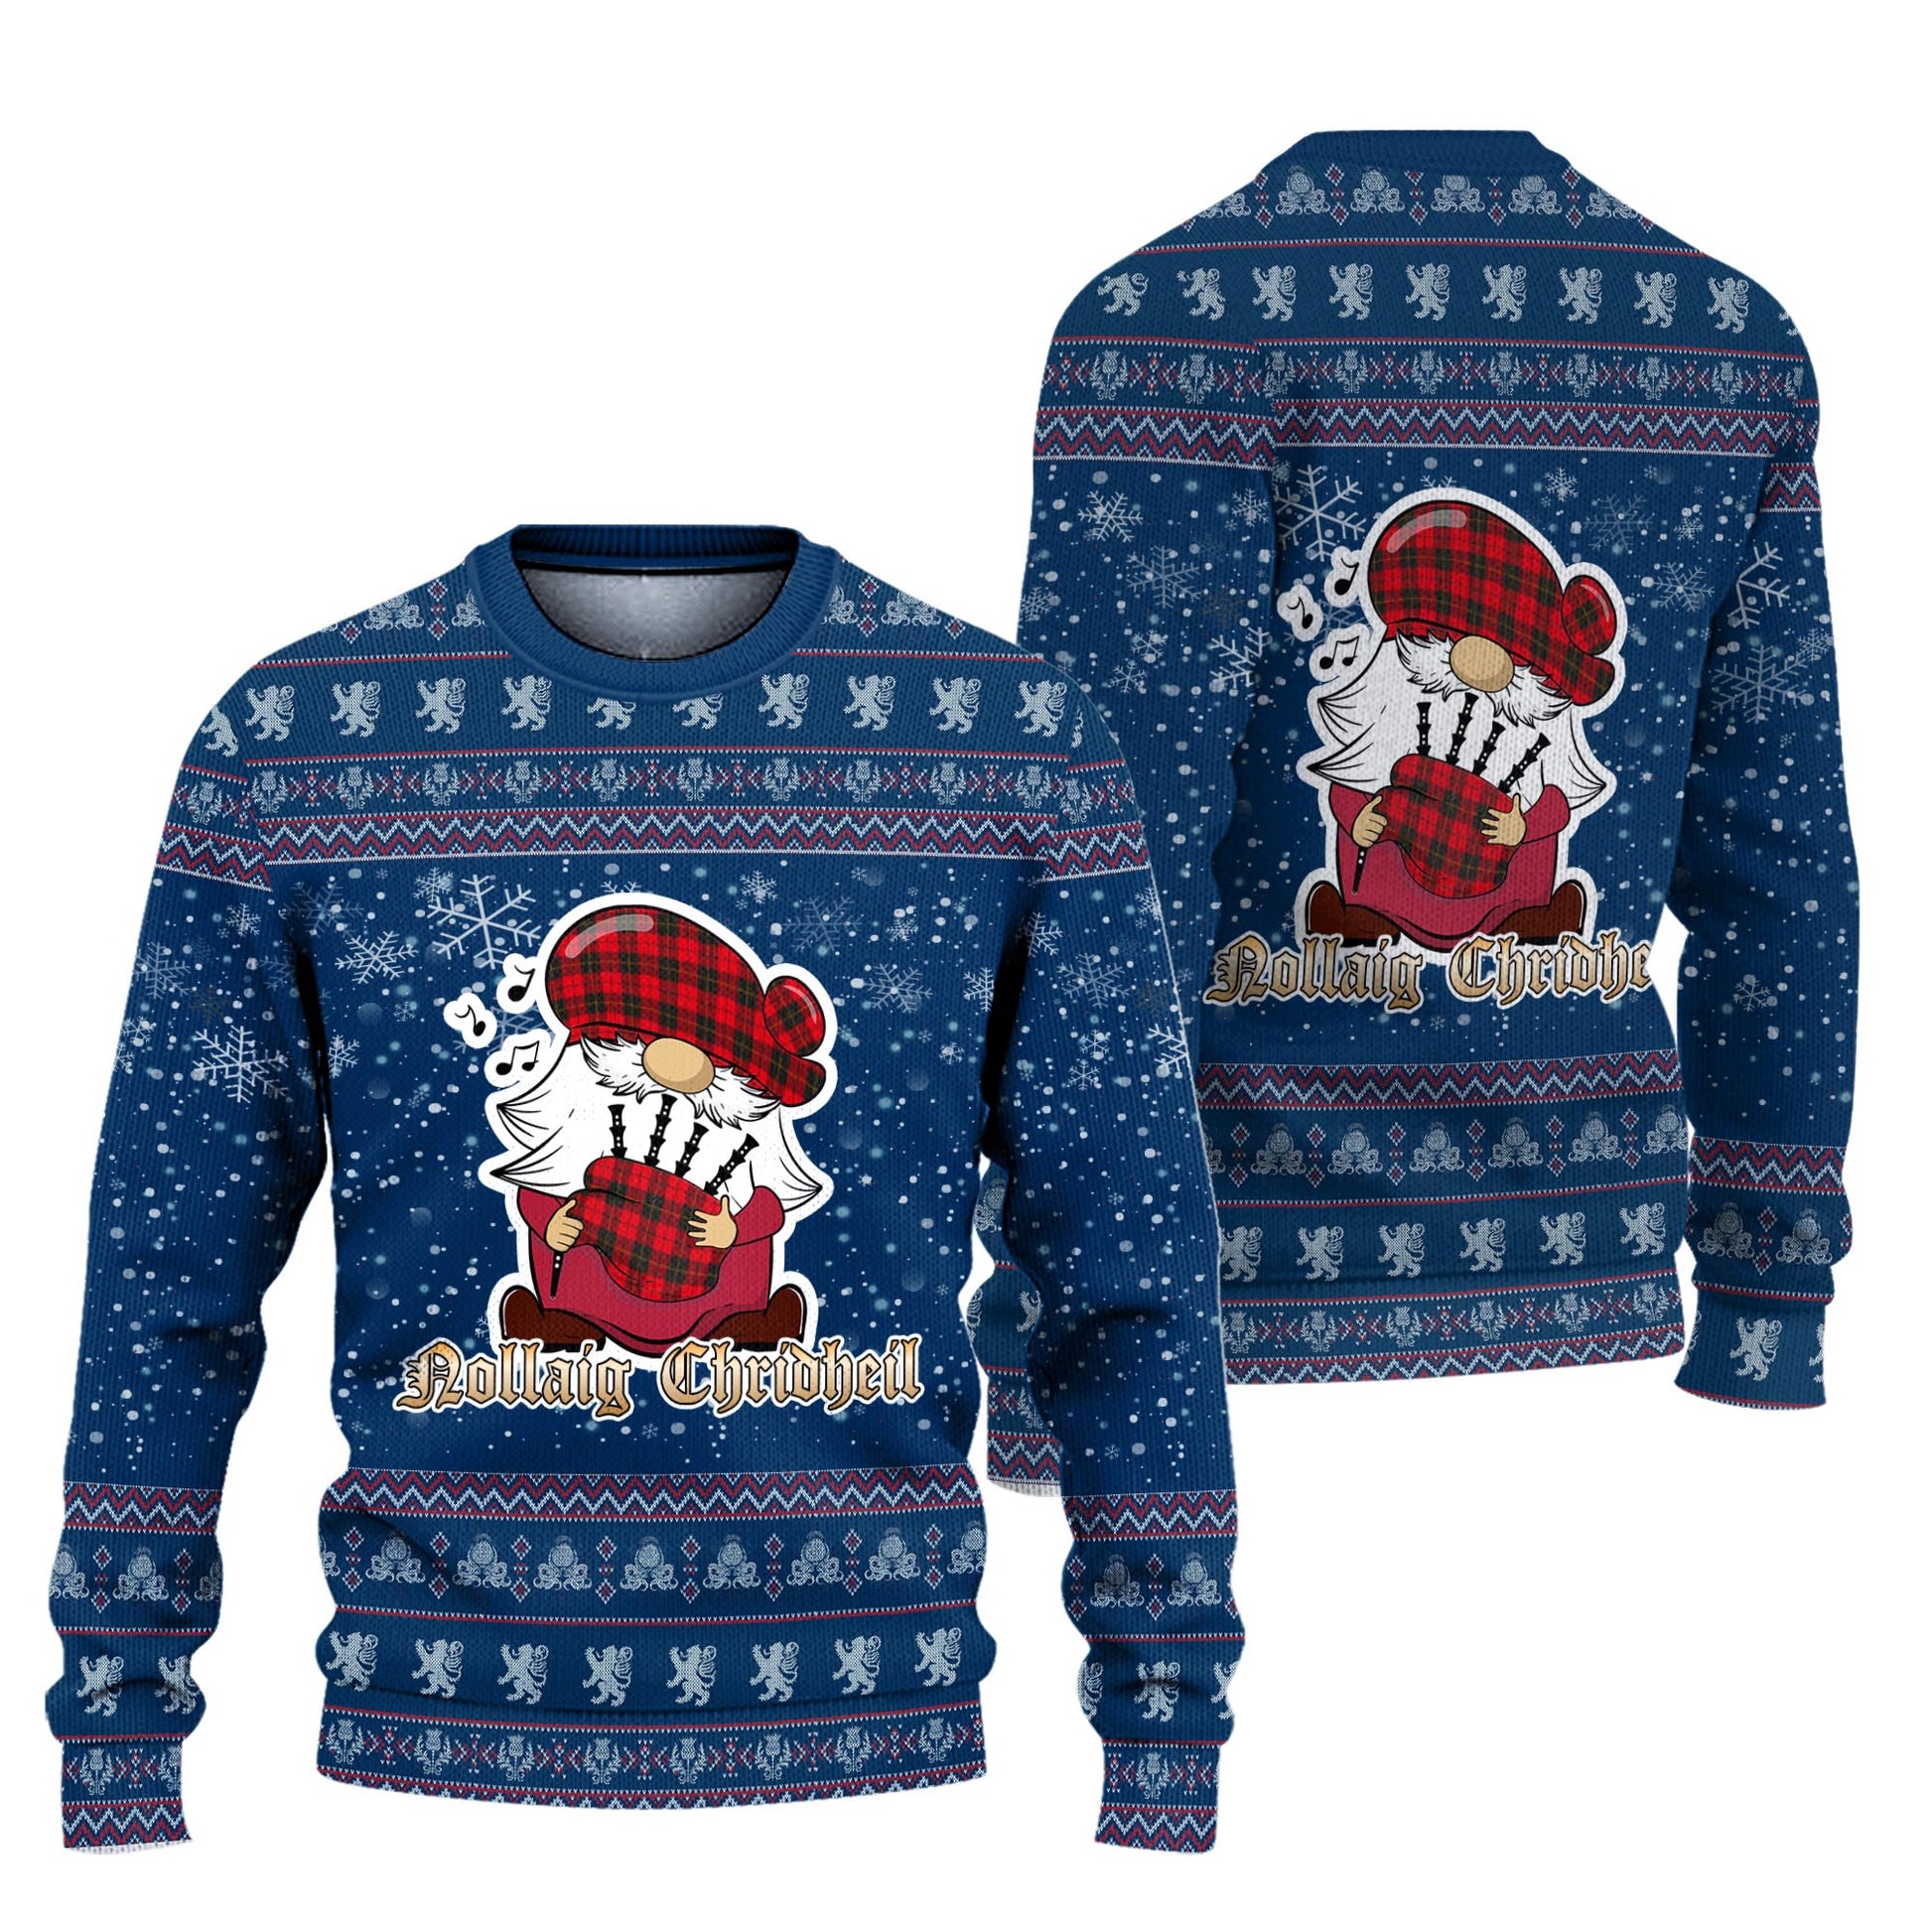 Wallace Weathered Clan Christmas Family Knitted Sweater with Funny Gnome Playing Bagpipes Unisex Blue - Tartanvibesclothing